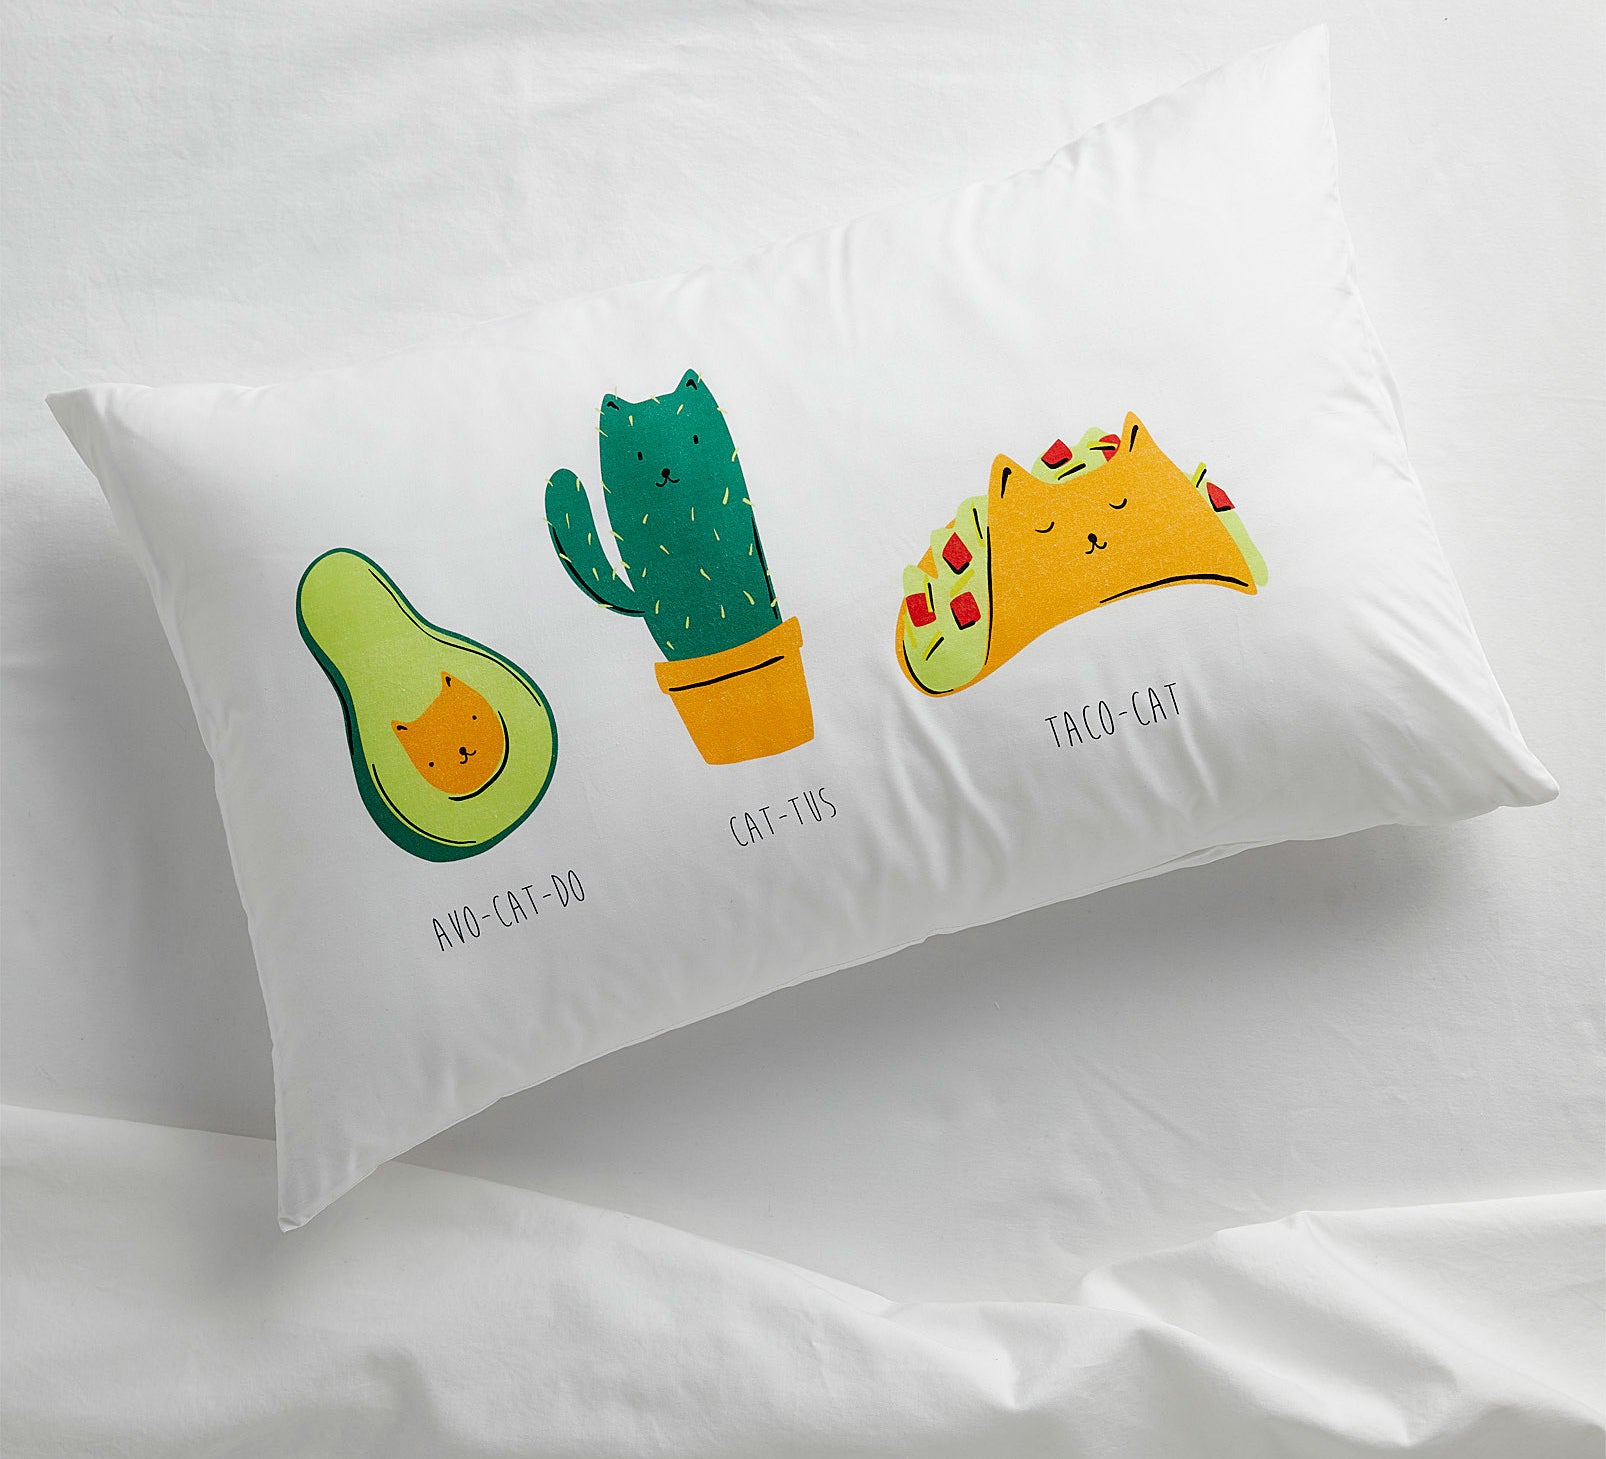 A pillowcase with different illustrations of cats on it